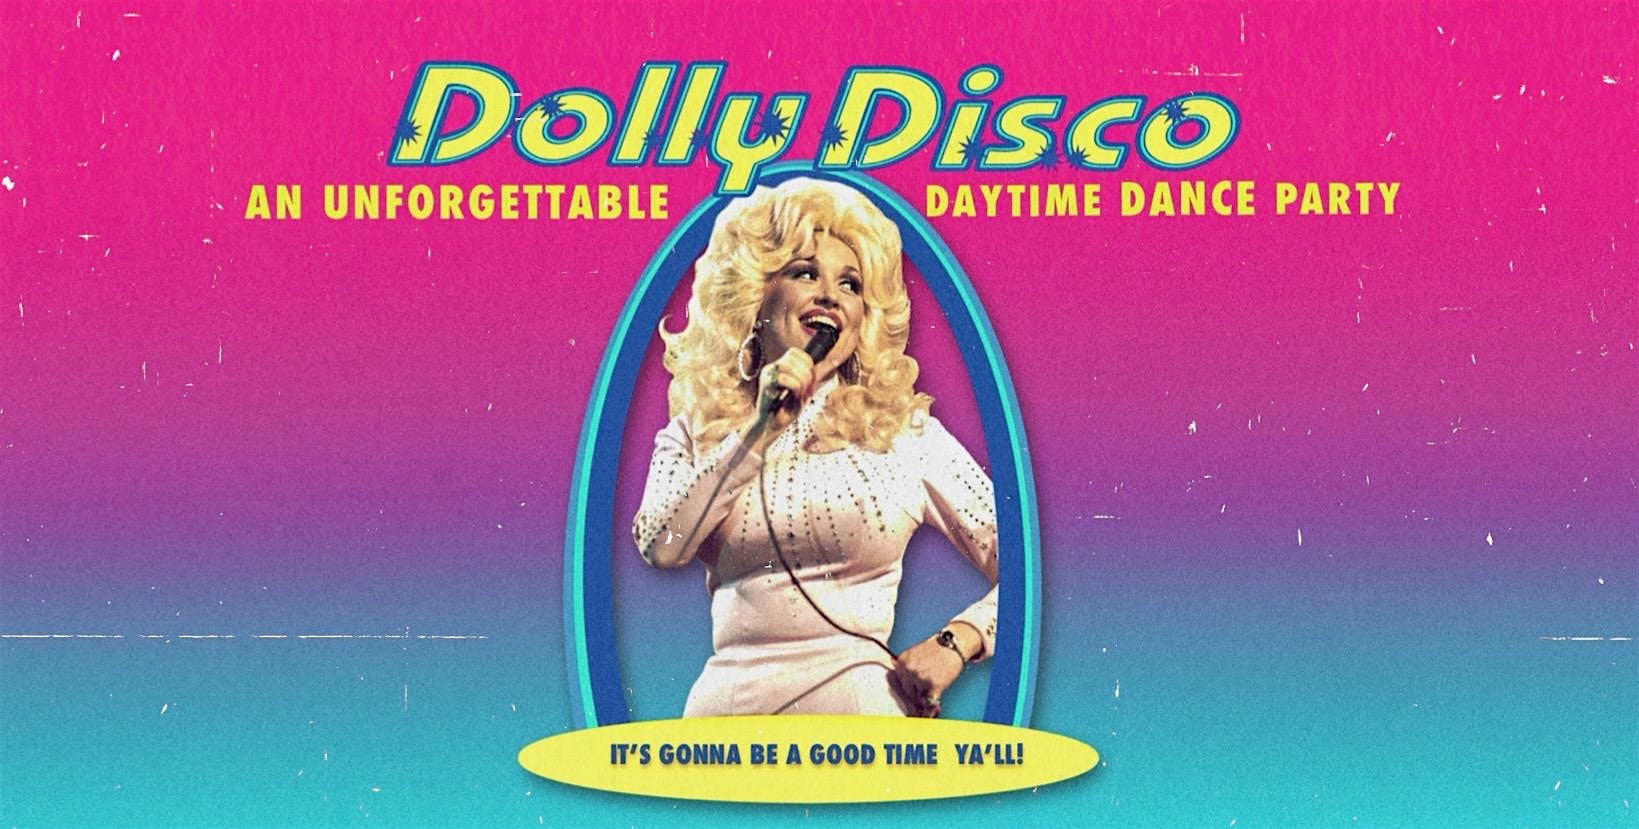 Dolly Disco: An Unforgettable Daytime Dance Party